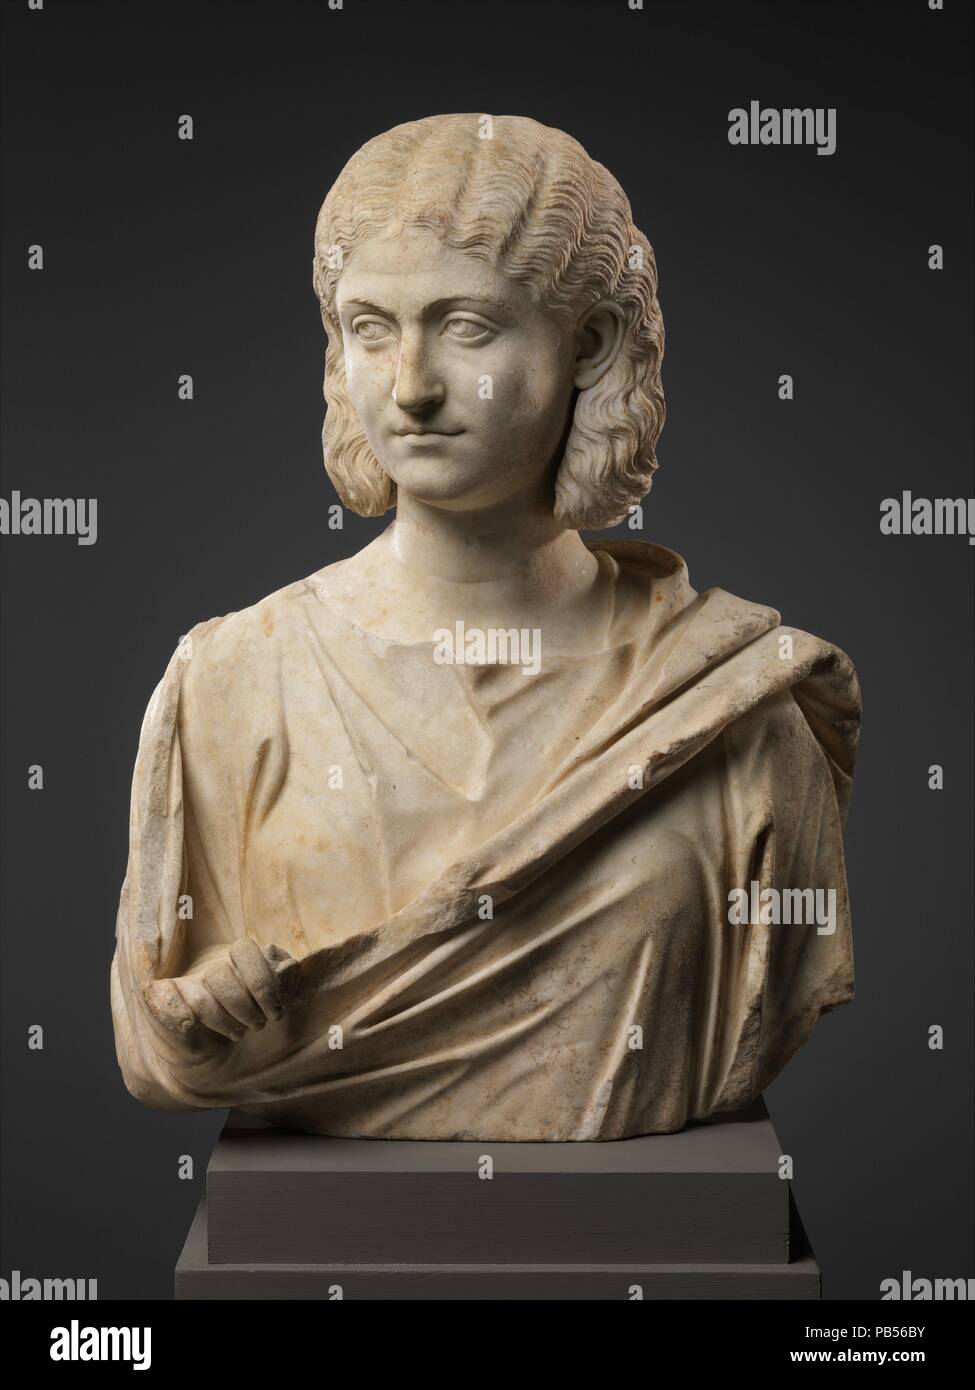 Marble bust of a woman. Culture: Roman. Dimensions: H. 25 5/8 in. (65.1 cm). Date: mid-3rd century A.D..  The subject of this extremely fine portrait wears her hair in a fashion associated with Otacilia Severa, wife of the emperor Philip the Arab (r. A.D. 244-249). The wavy hair is parted in the center, looped back over the ears to form a wide flat braid pinned to the back of the head. Museum: Metropolitan Museum of Art, New York, USA. Stock Photo